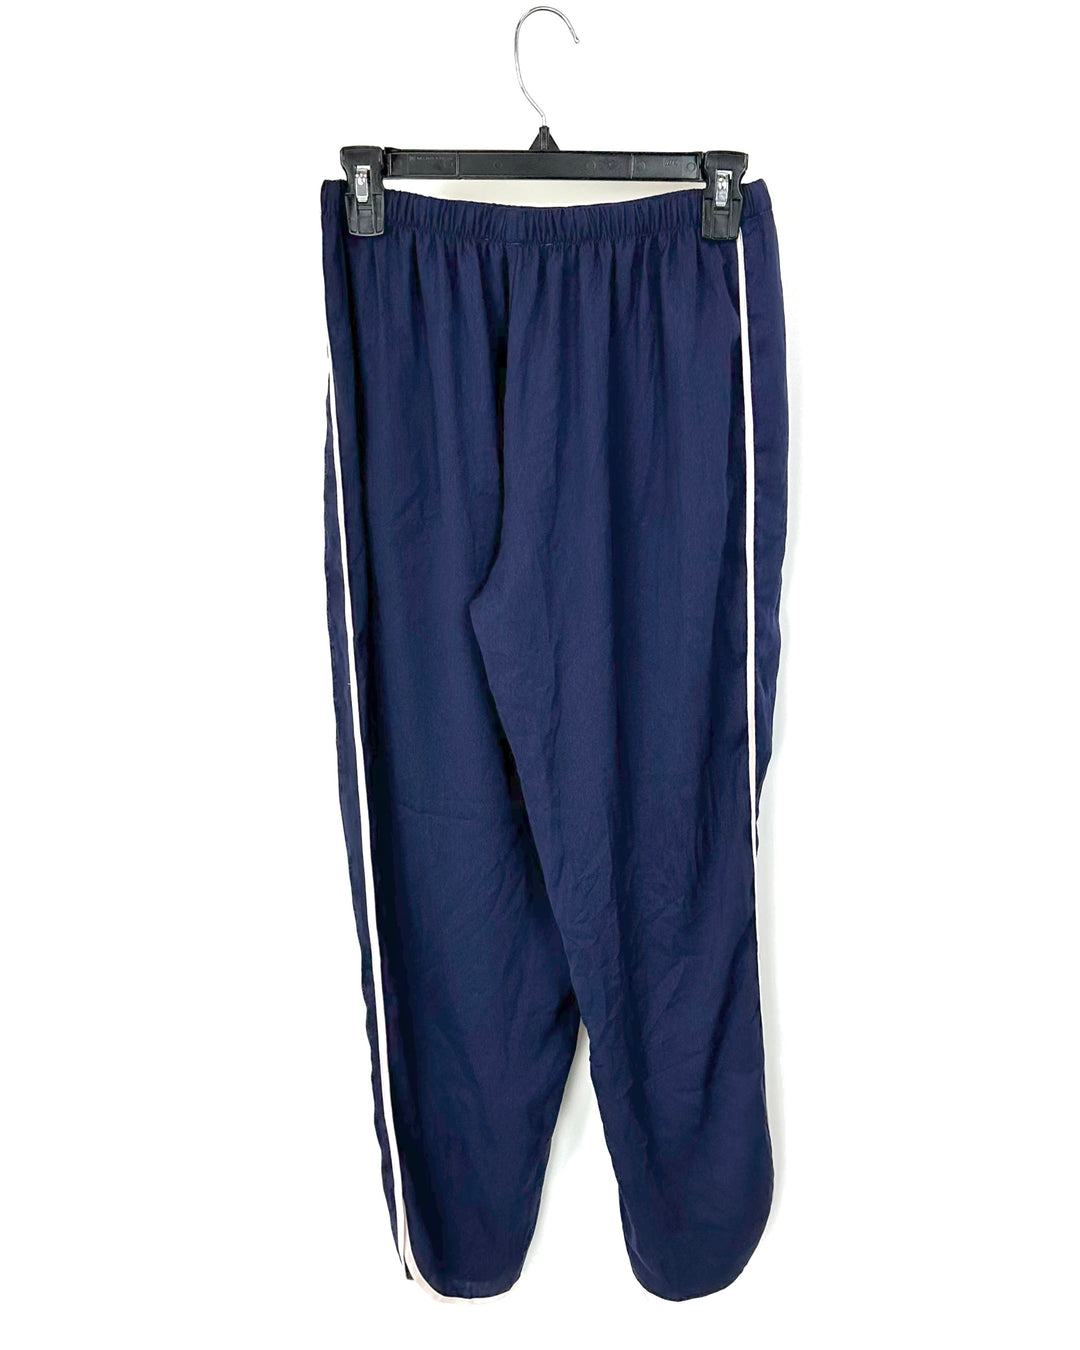 Navy Blue Sleepwear Pants With Pink Trim - Small